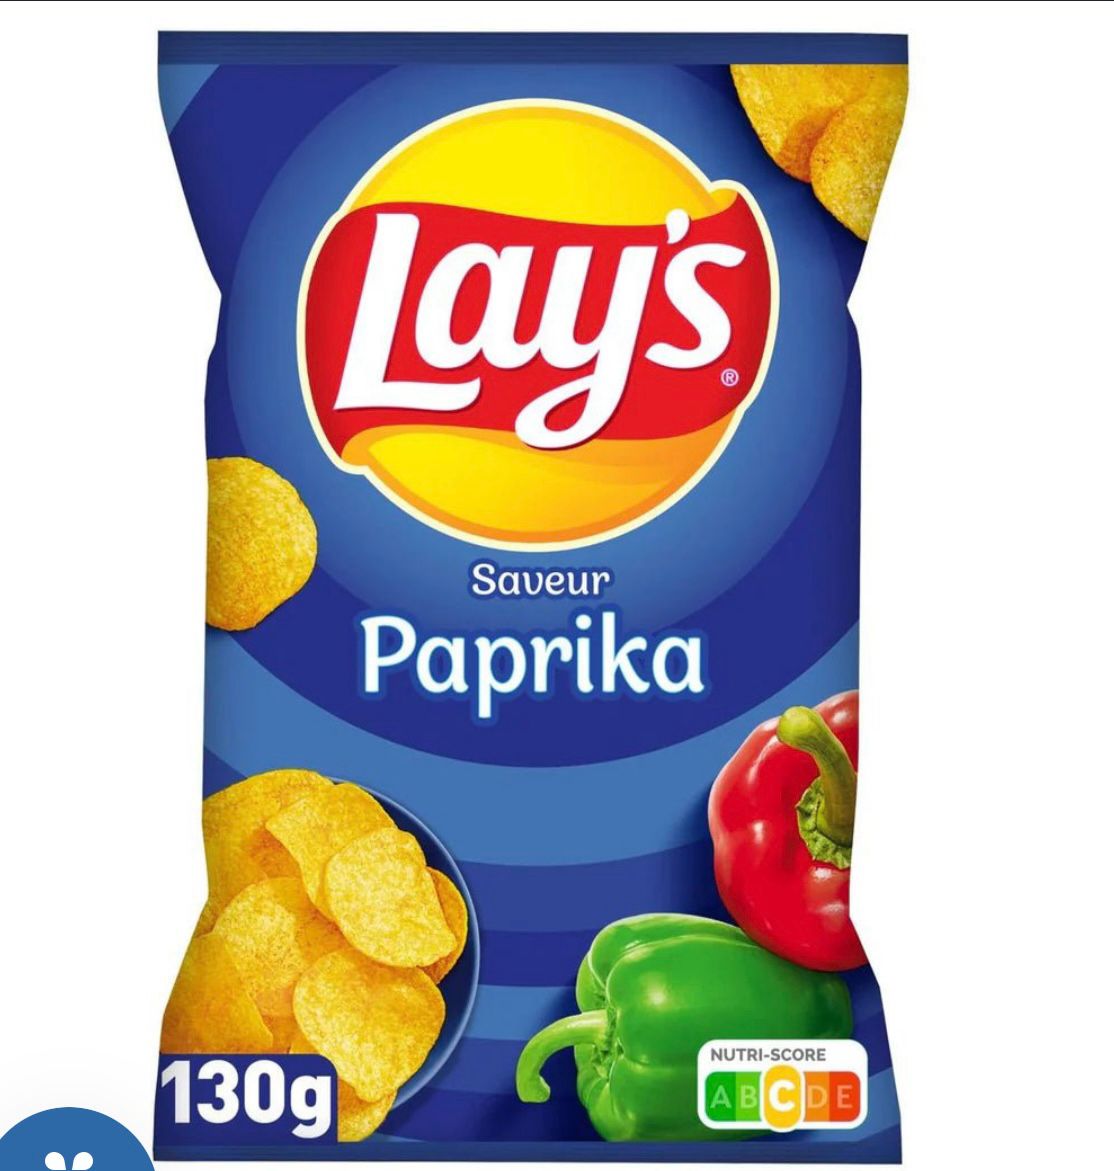 Lays: 19 Flavours to Choose from